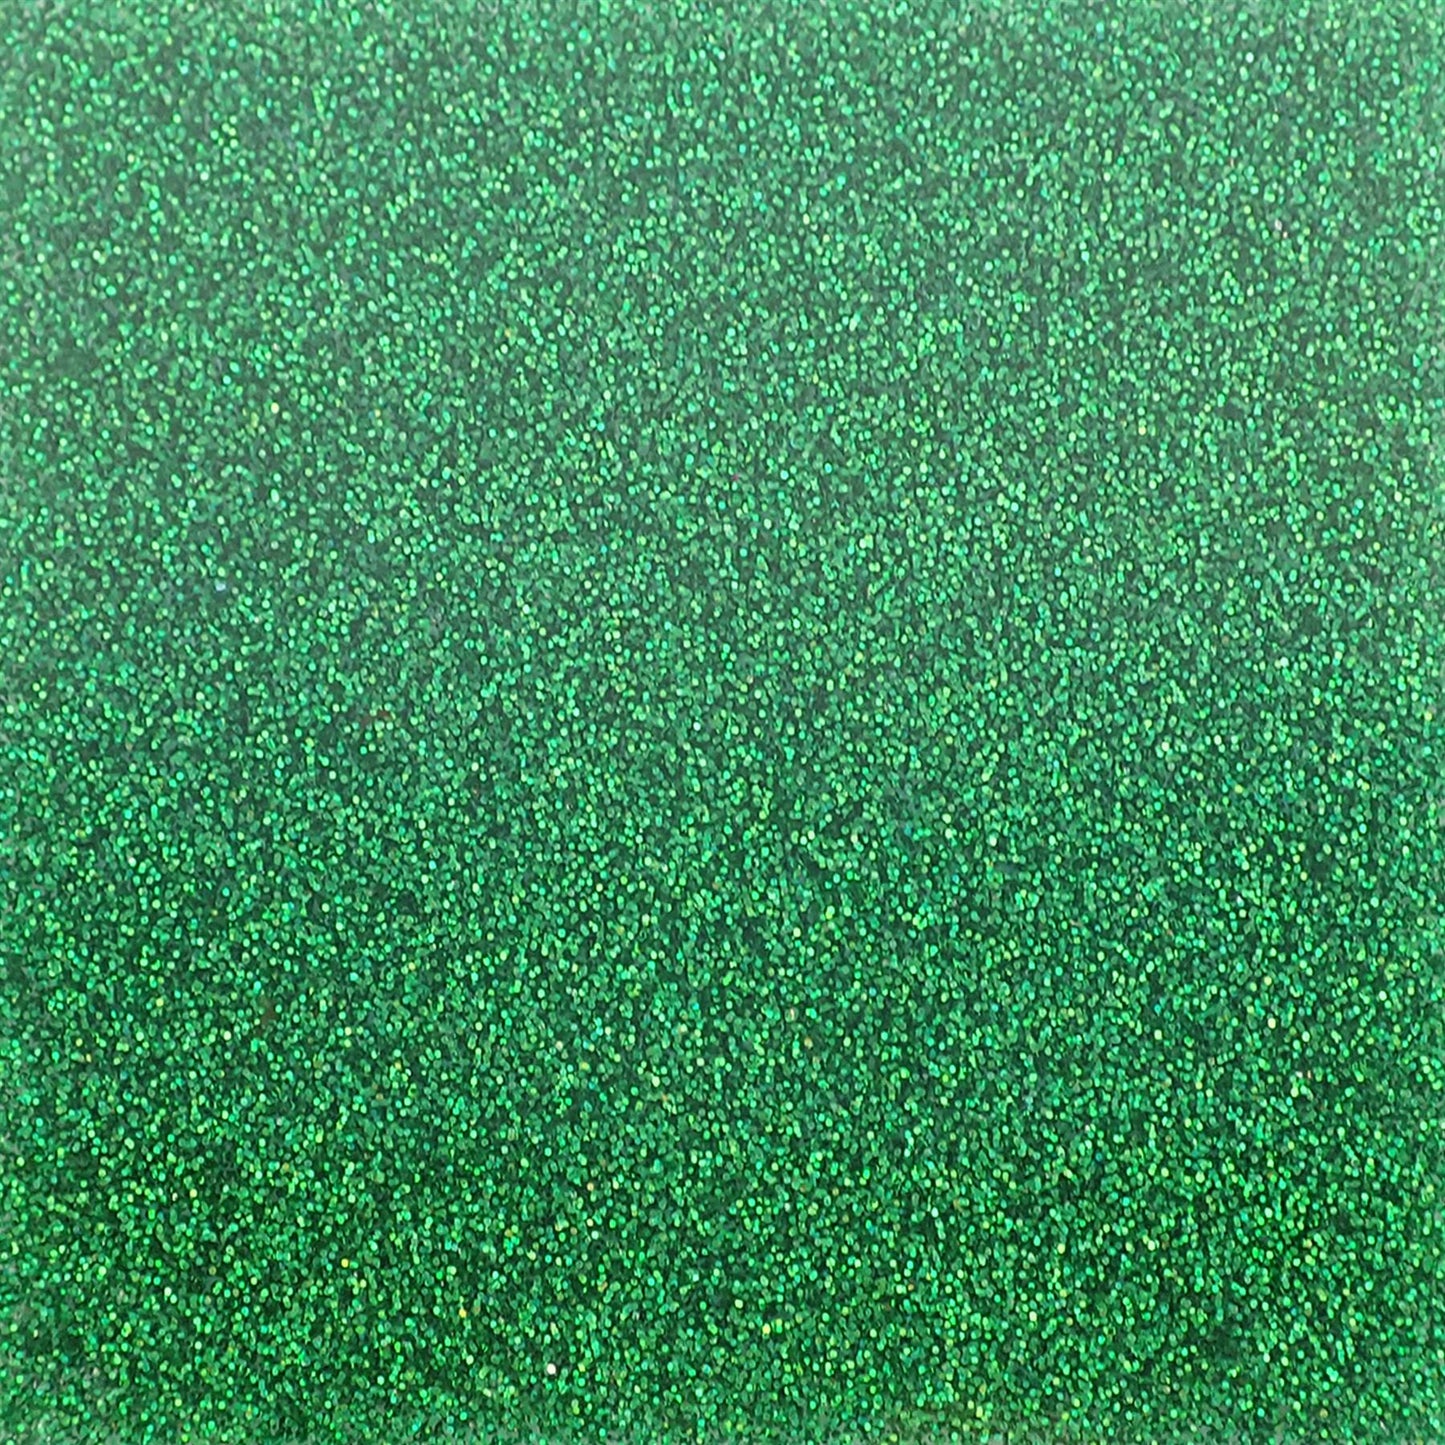 Incudo Grass Green 2-Sided Holographic Glitter Acrylic Sheet - 300x200x3mm (11.8x7.87x0.12")